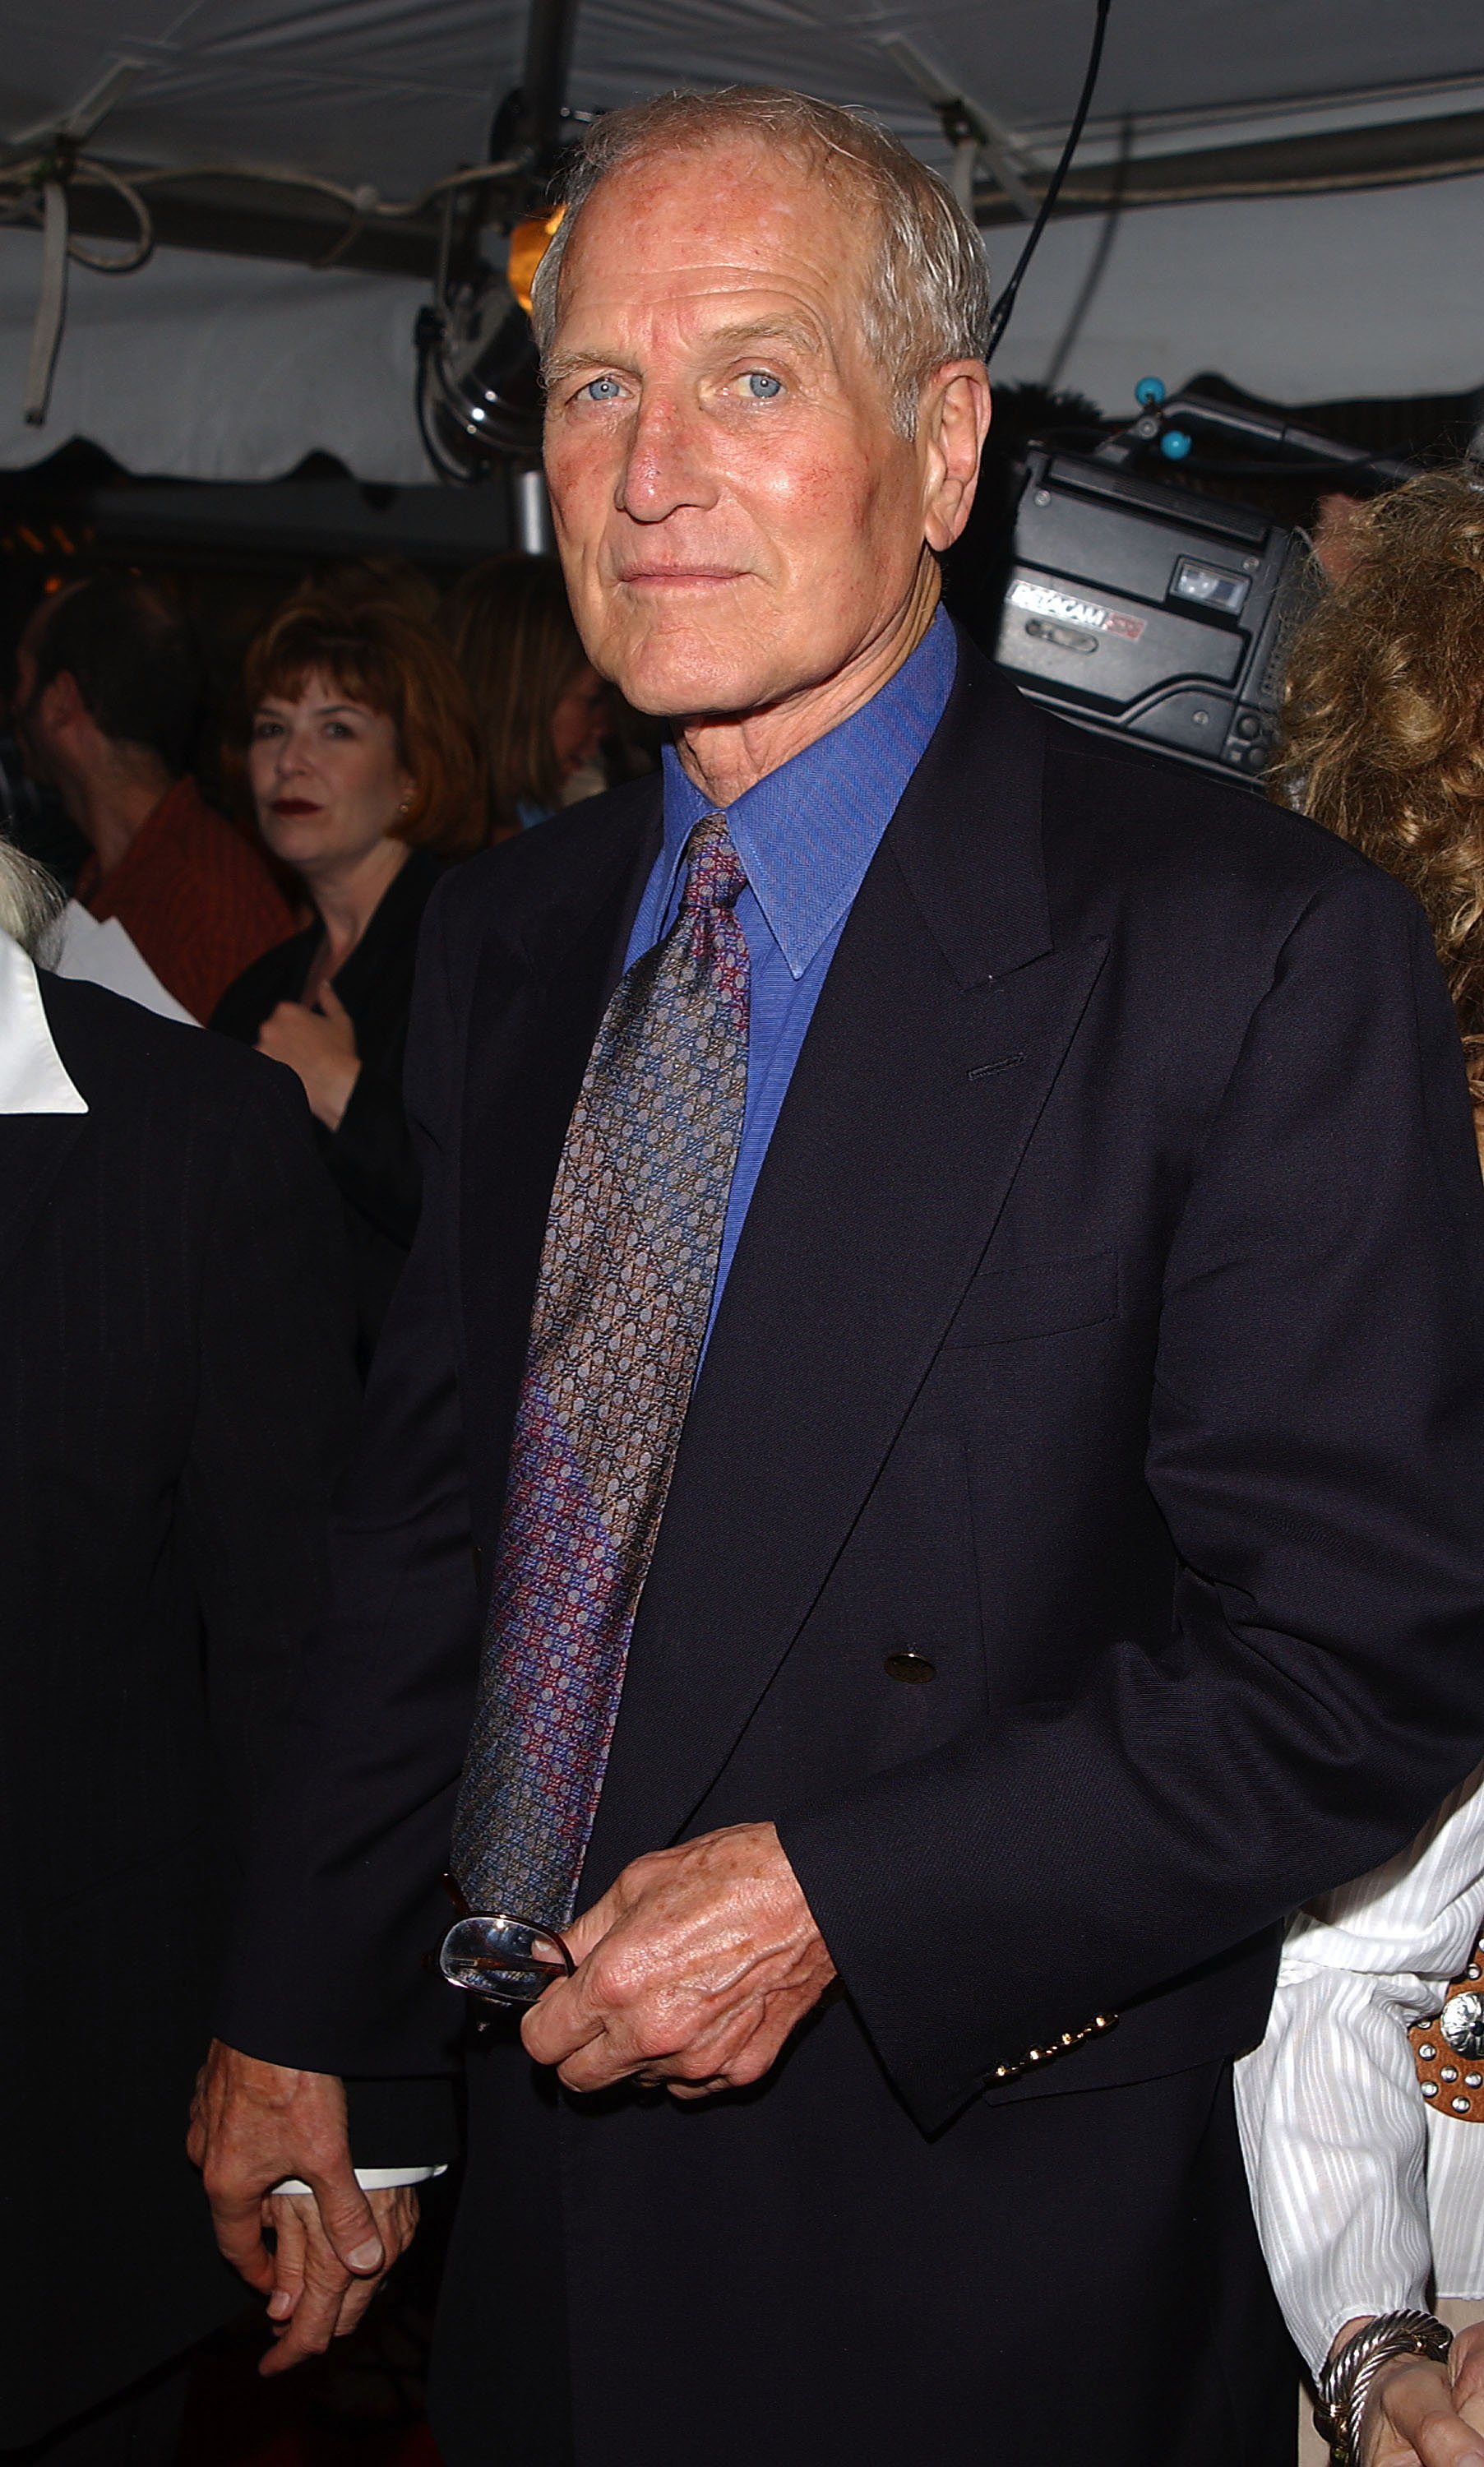 Paul Newman arrives for the "Road To Perdition" film premiere at the Ziegfeld Theater on July 9, 2002 in New York City | Source: Getty Images